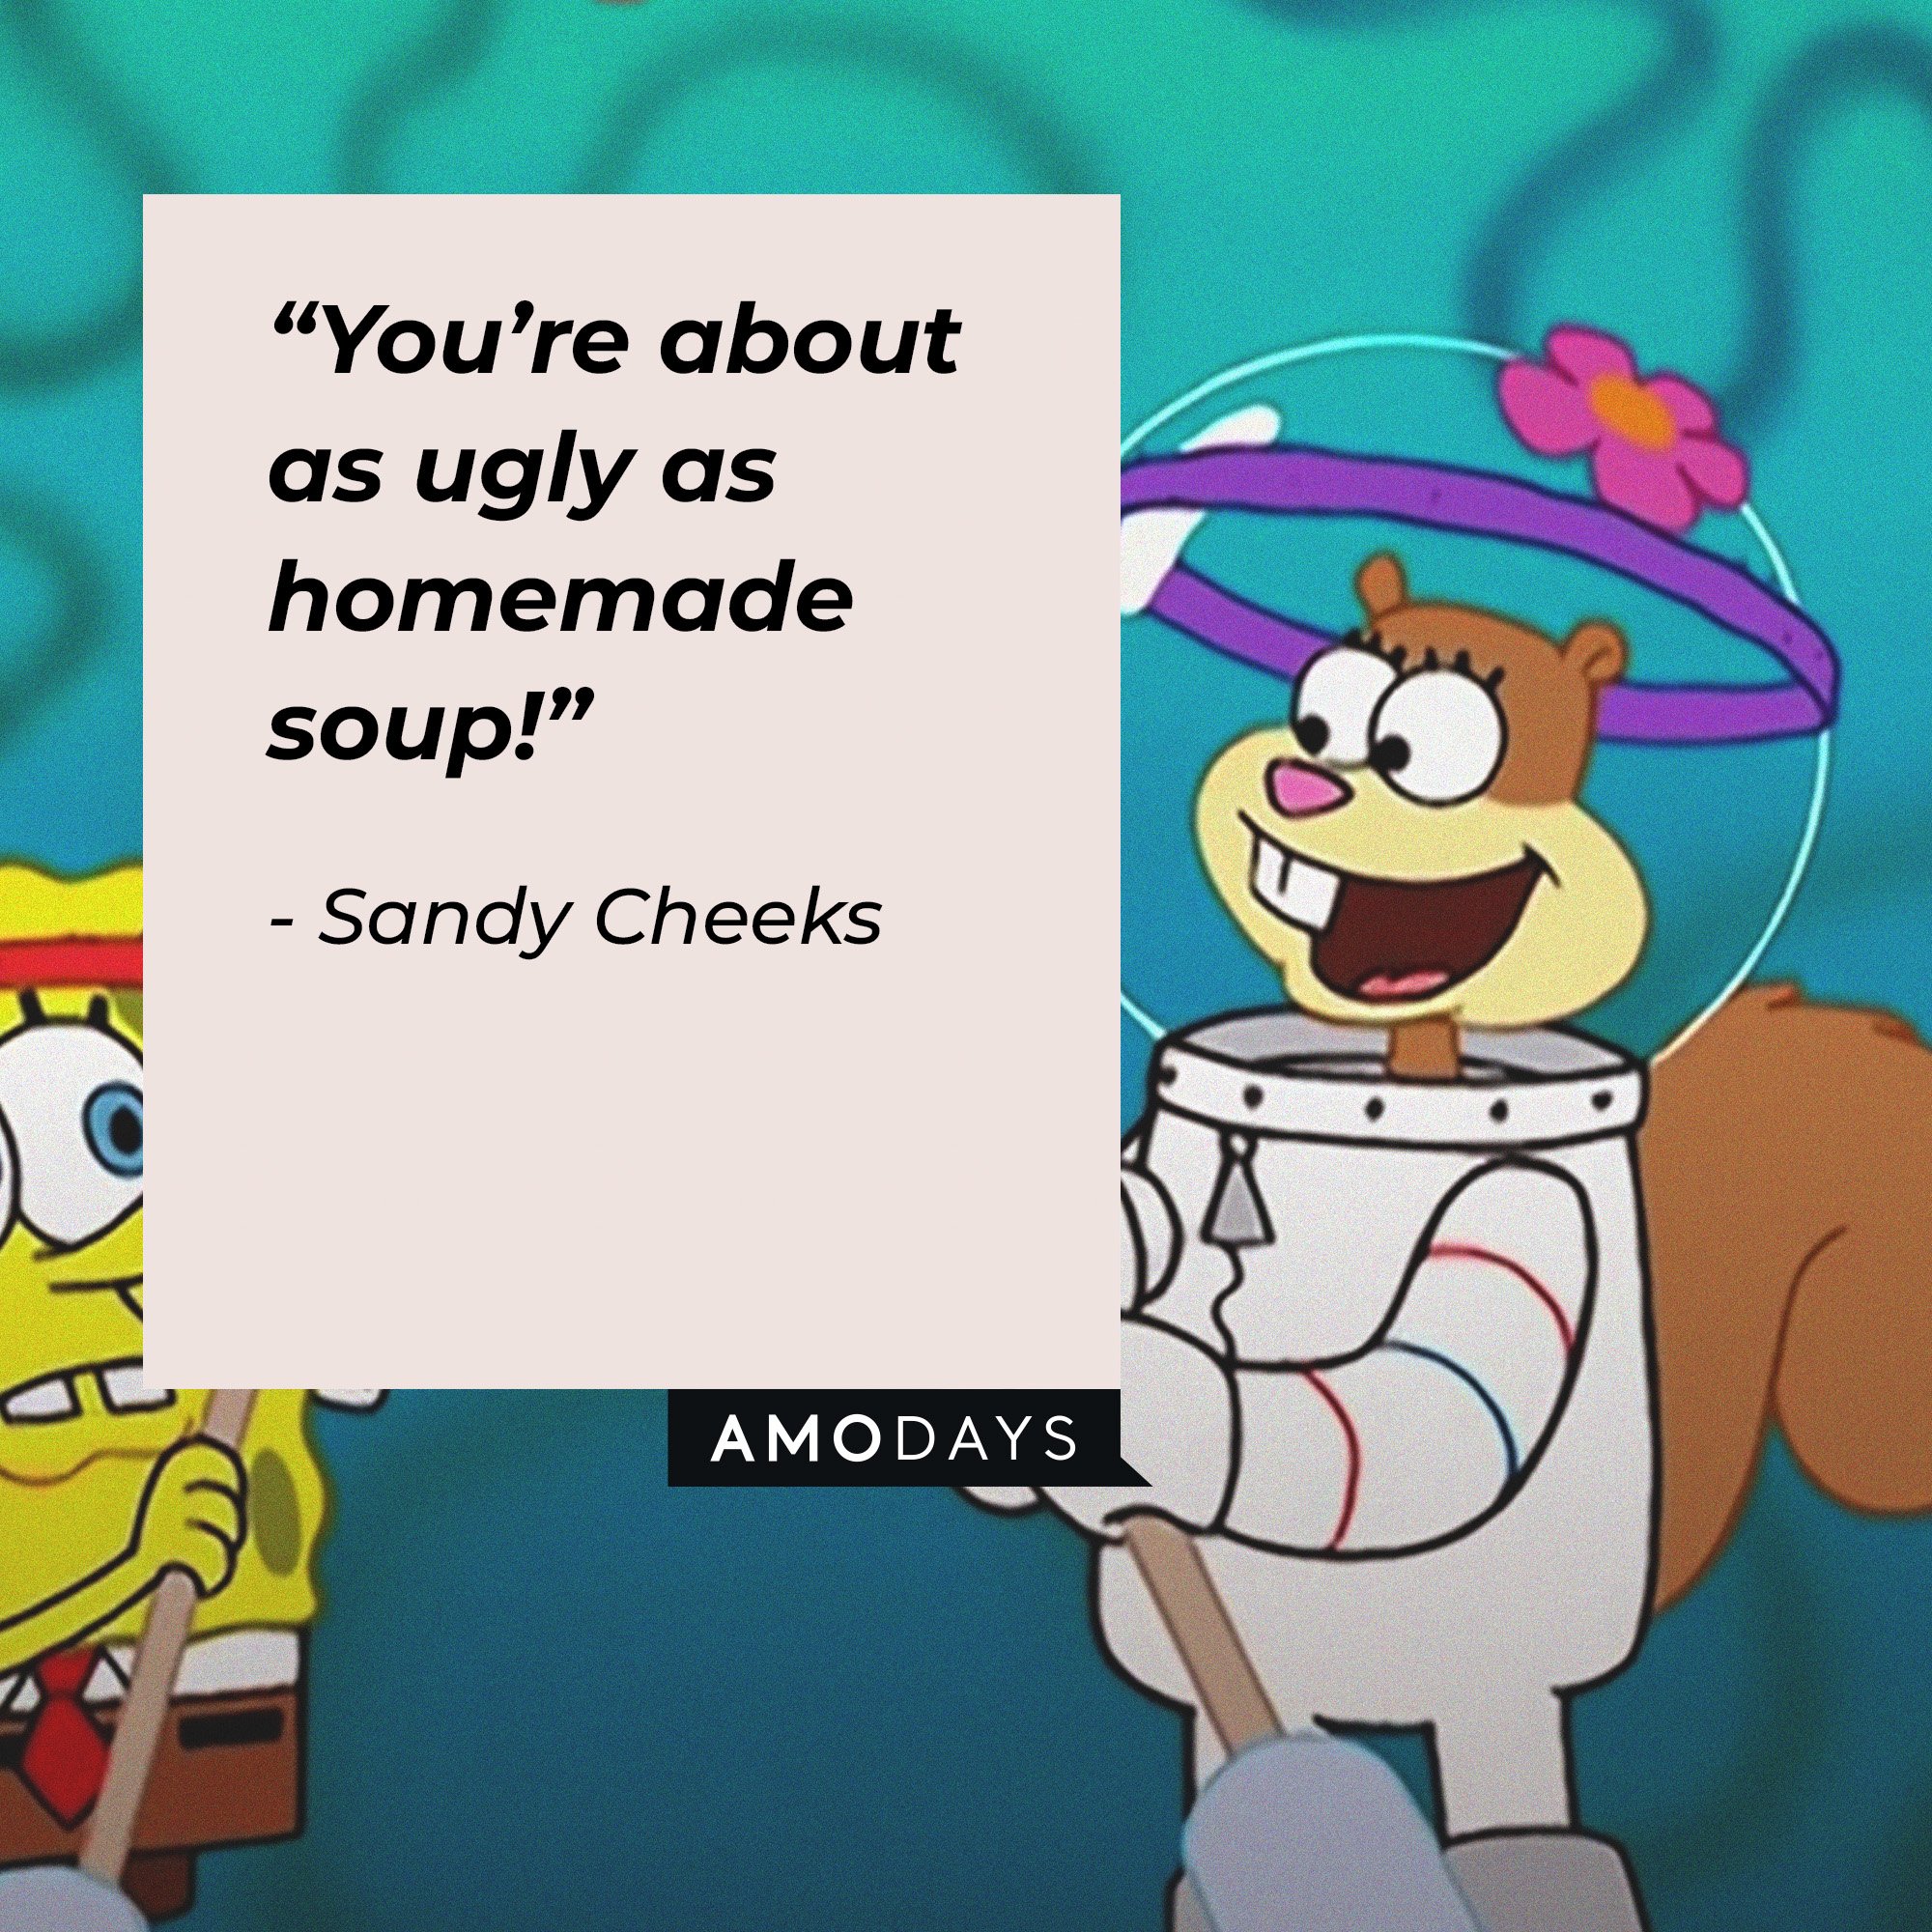 Sandy Cheeks's quote:  “You’re about as ugly as homemade soup!” | Image: AmoDays 